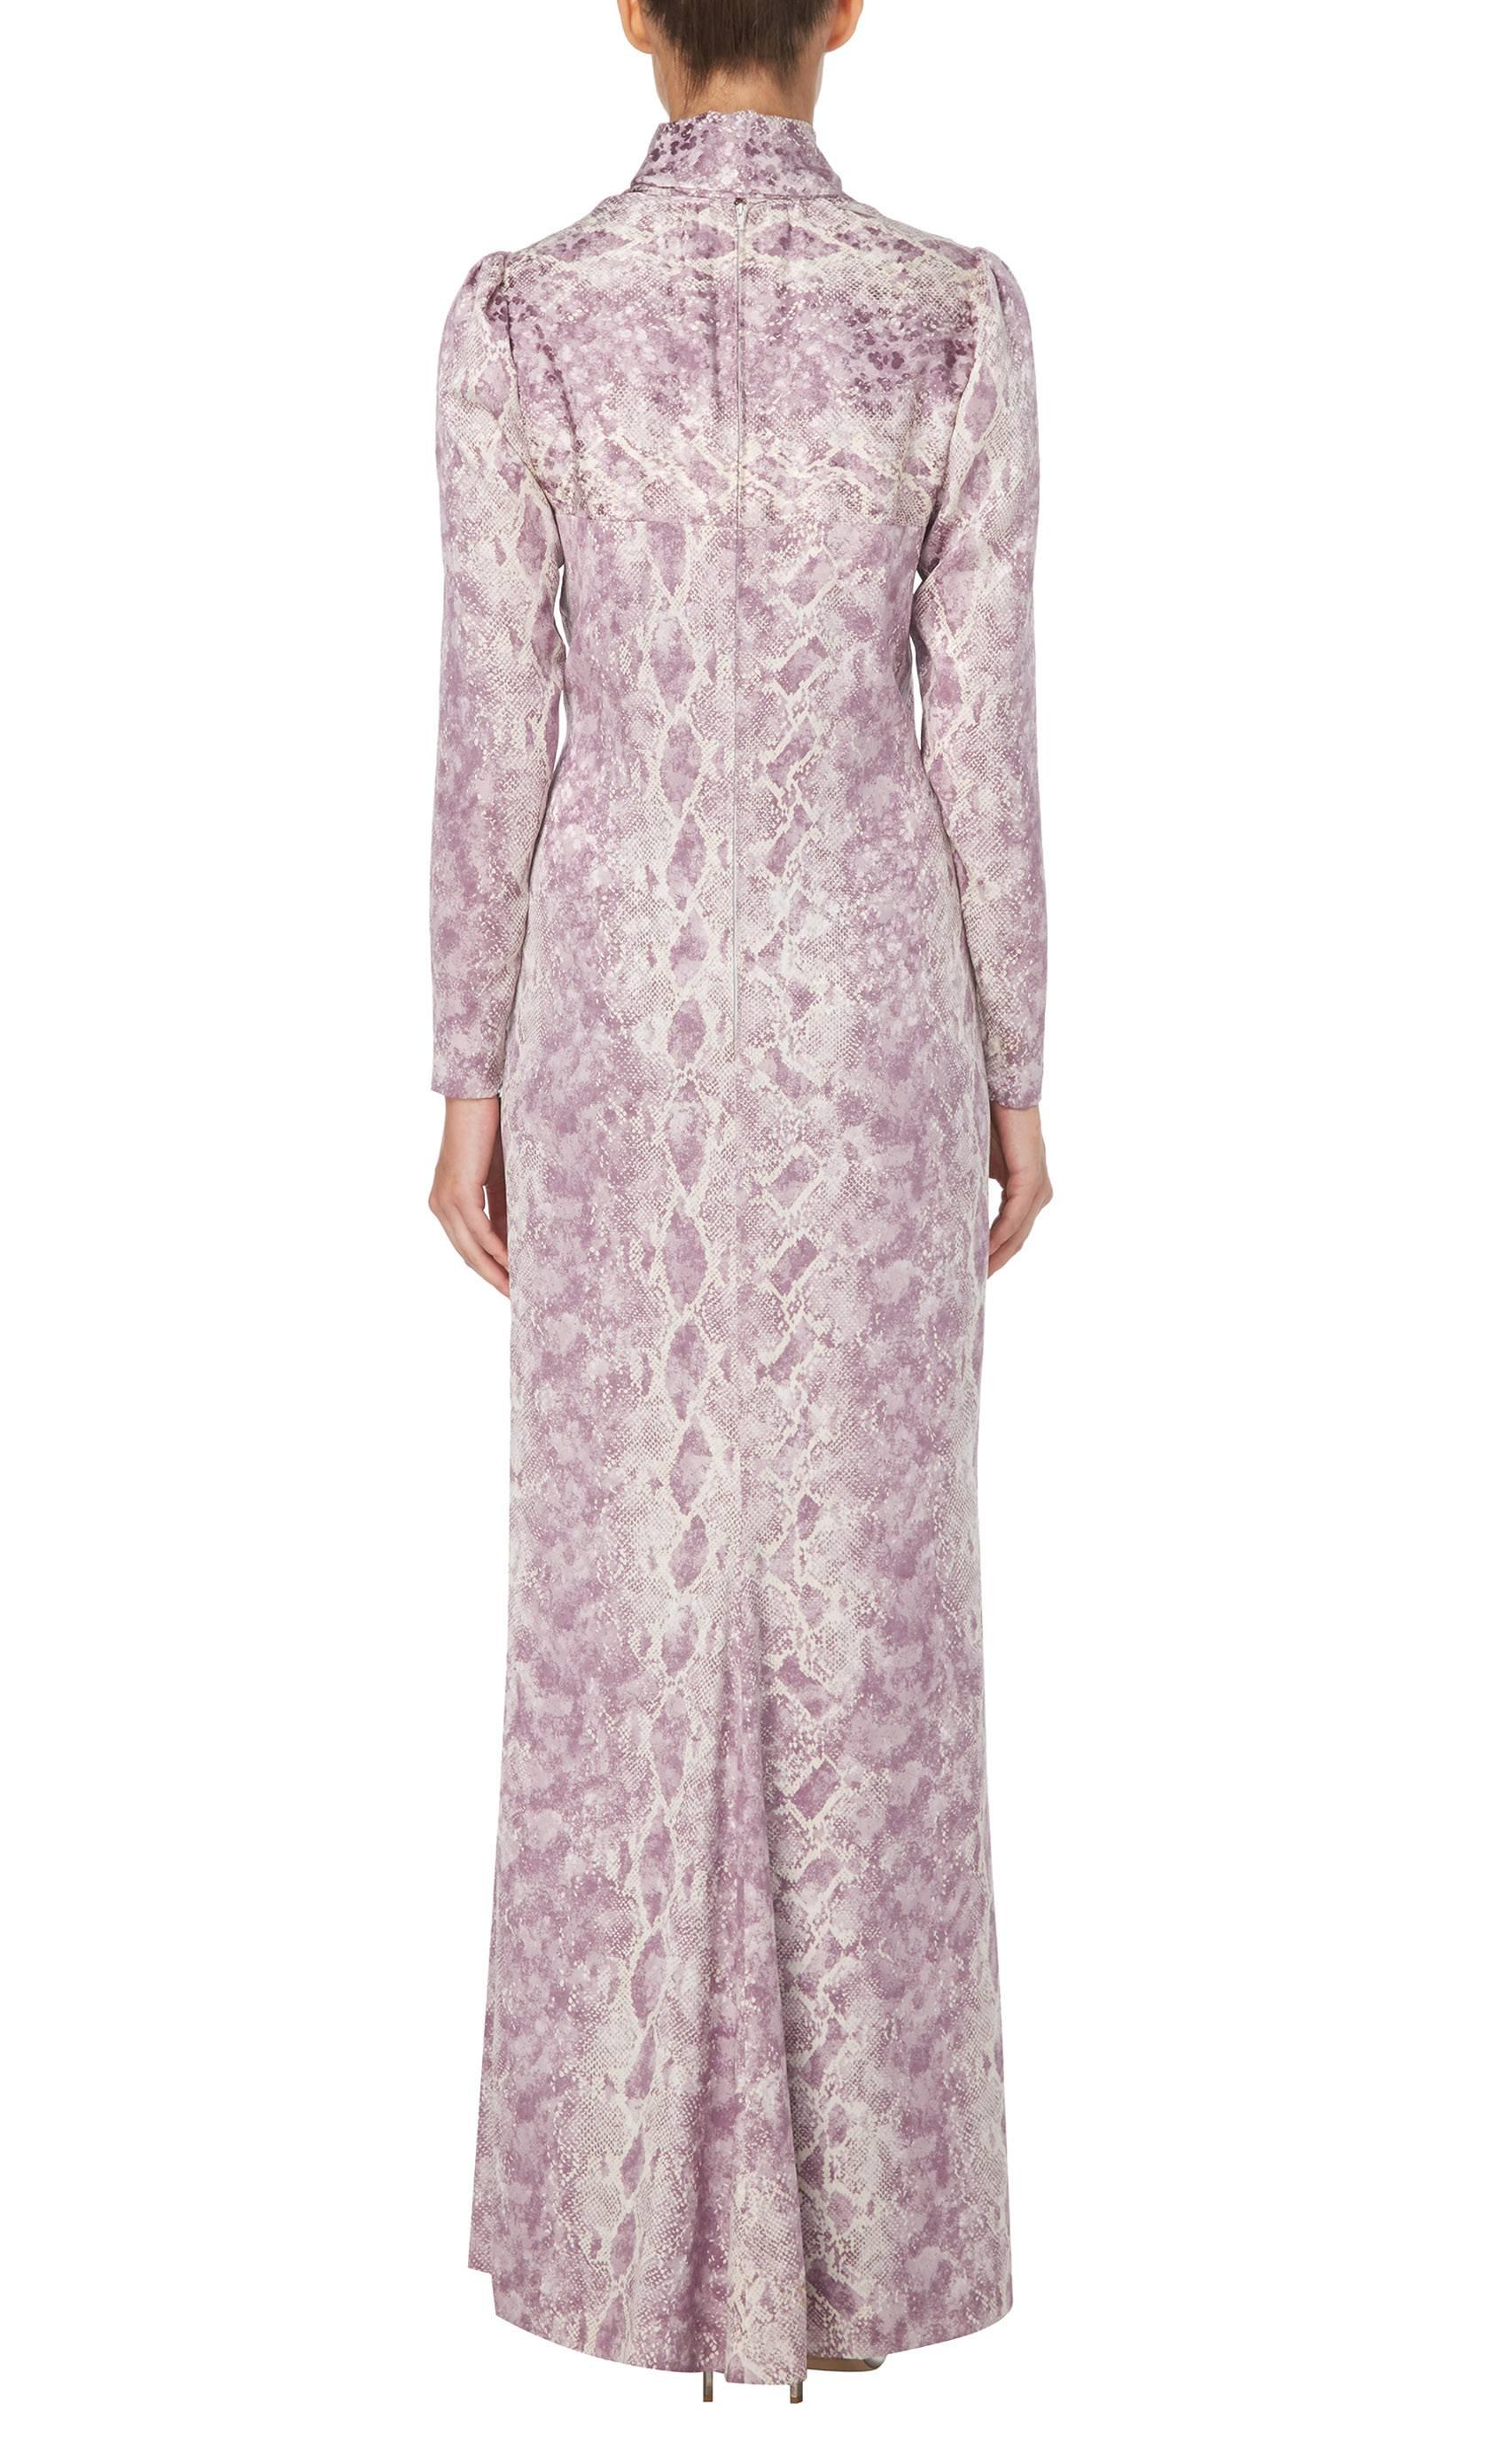 Gray Yves Saint Laurent Haute Couture purple printed dress, Spring/Summer 1970 For Sale